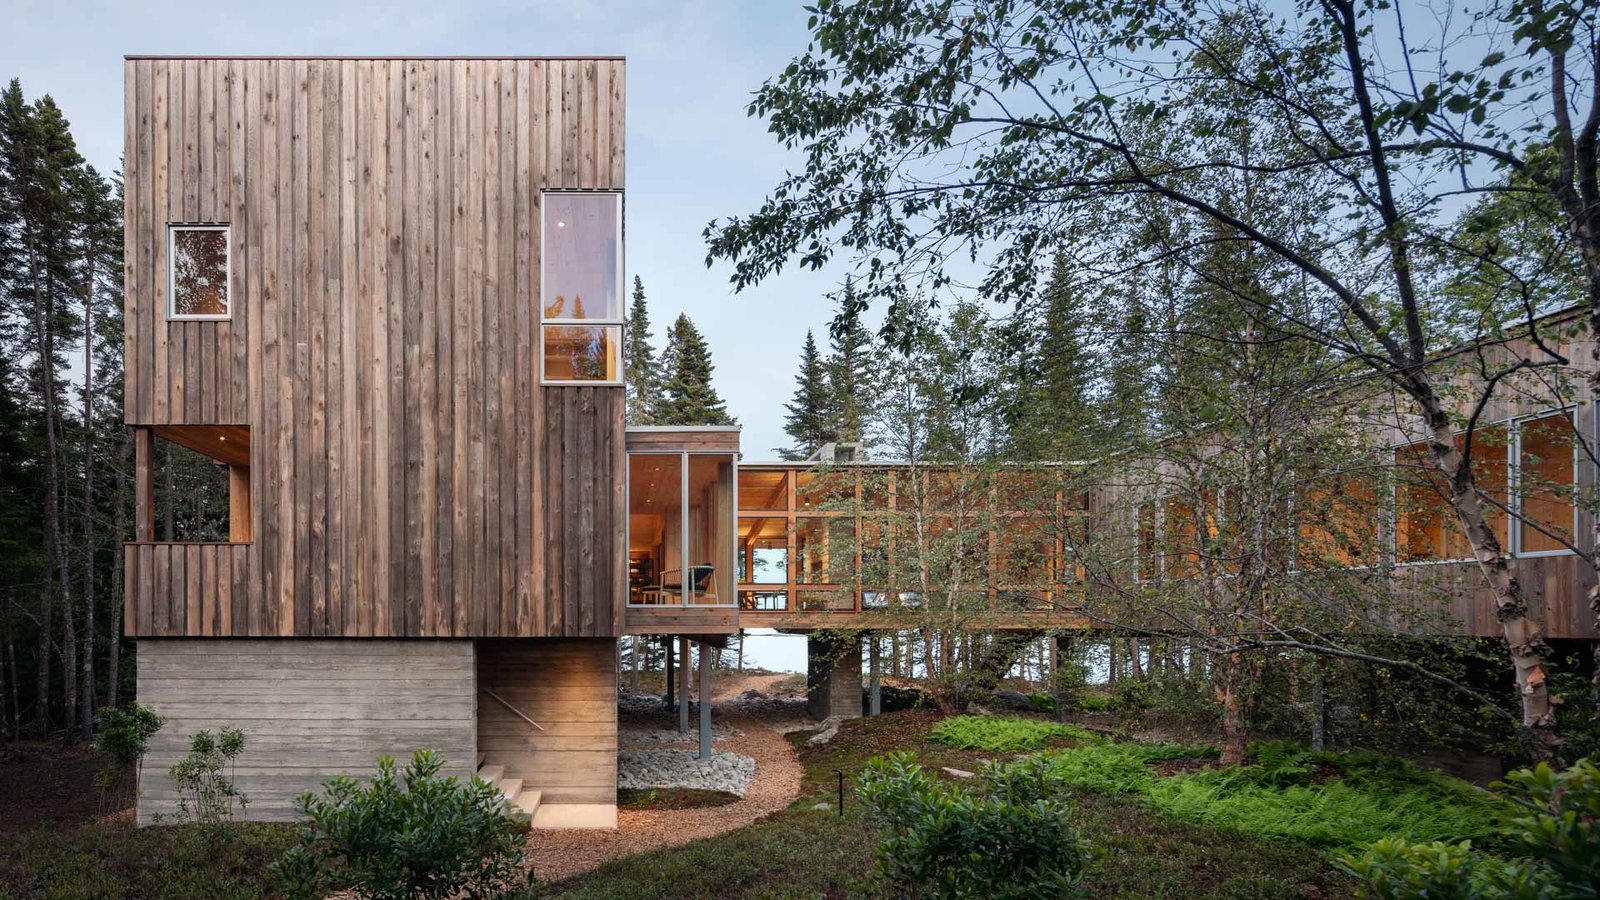 "The homeowner describing that he loved the mossy, fern understory brought the idea to my mind to be up in the trees," says architect Russ Tyson.